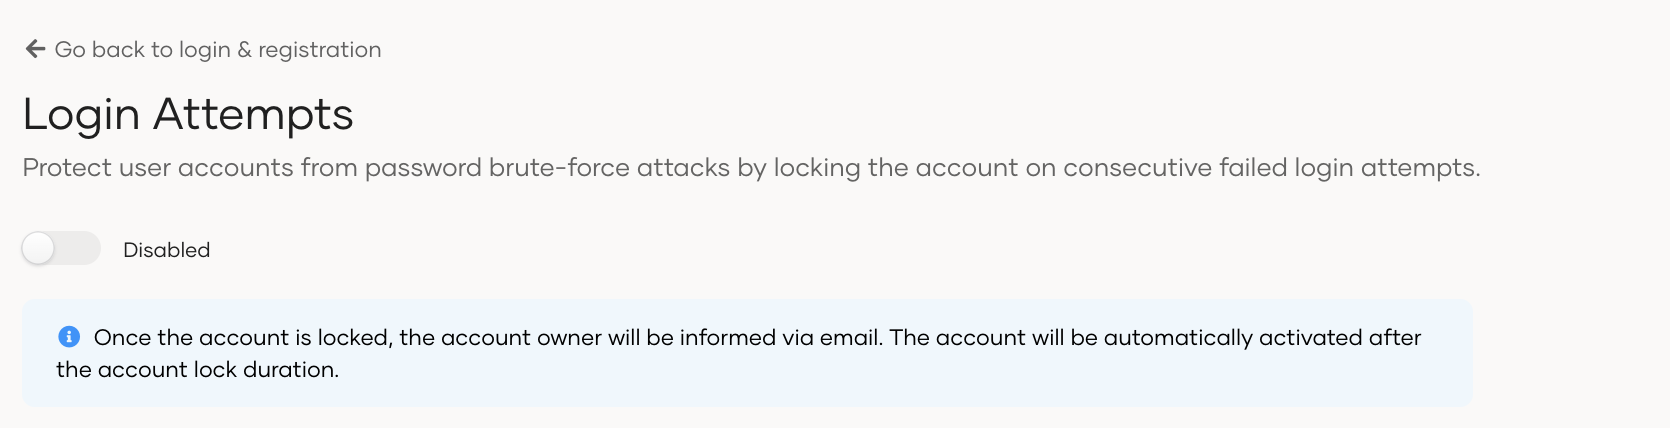 Disable login attempts security